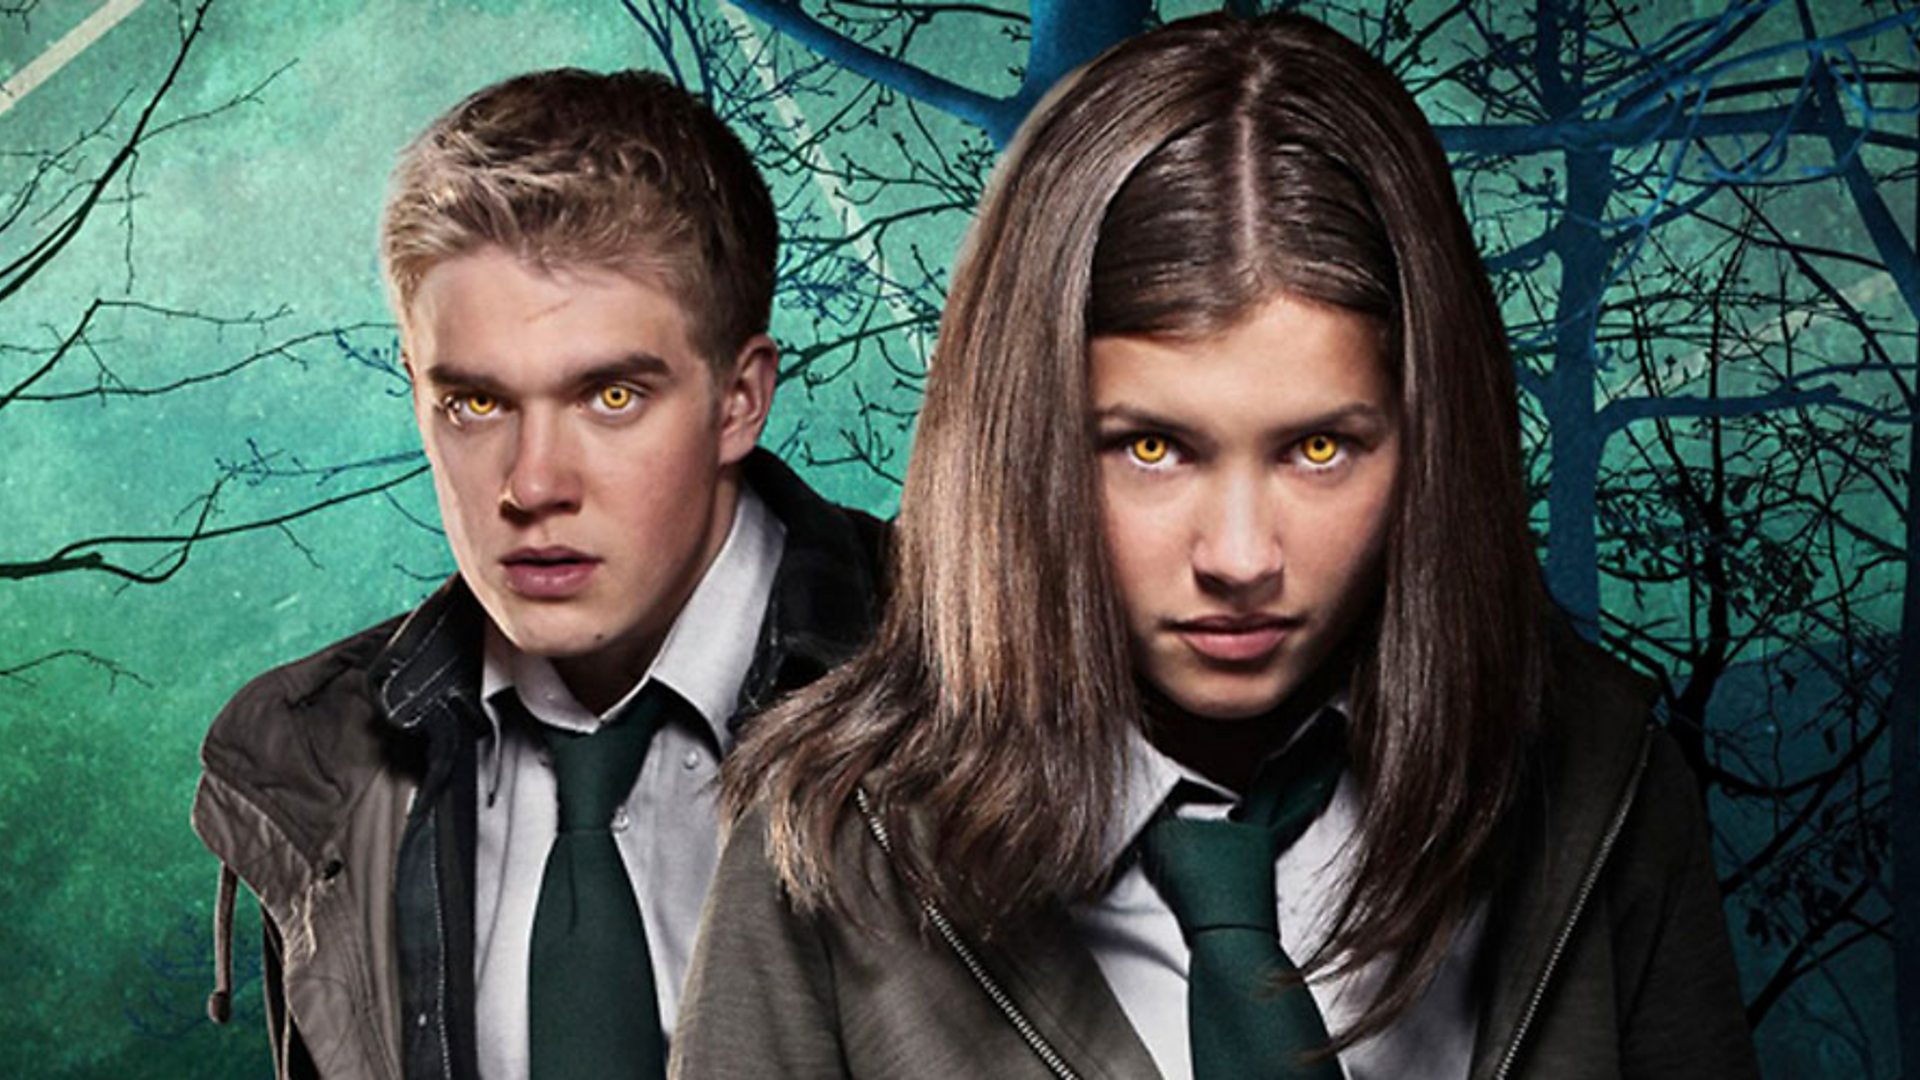 Wolfblood Wallpapers